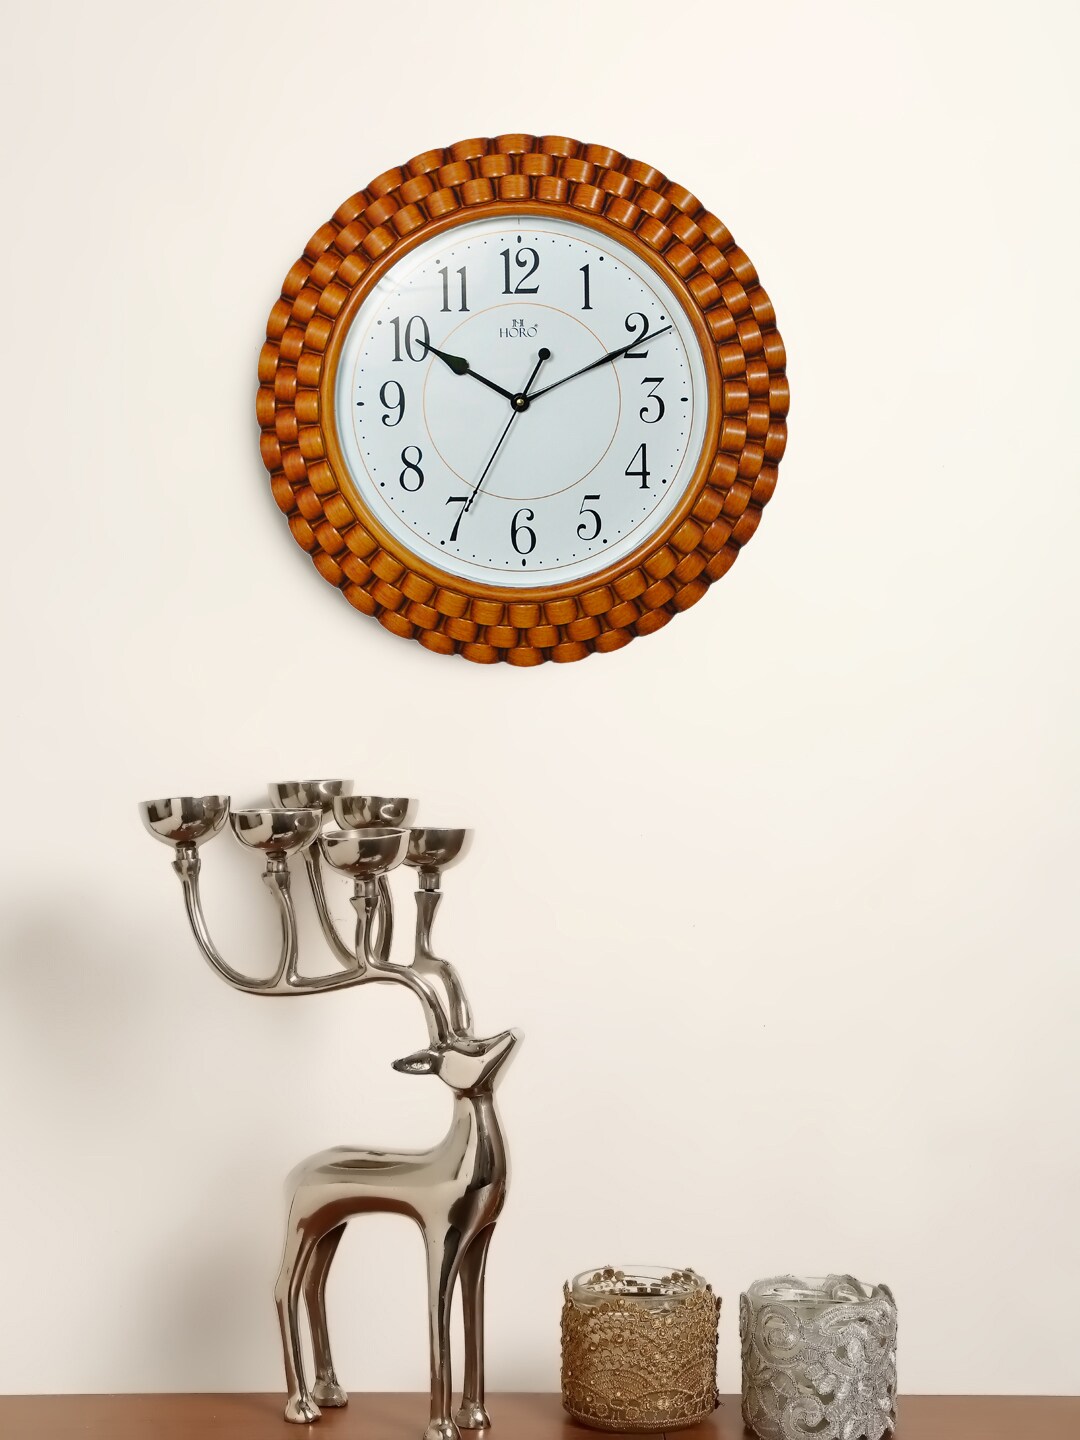 Horo White Handcrafted Geometric Solid Analogue Wall Clock Price in India